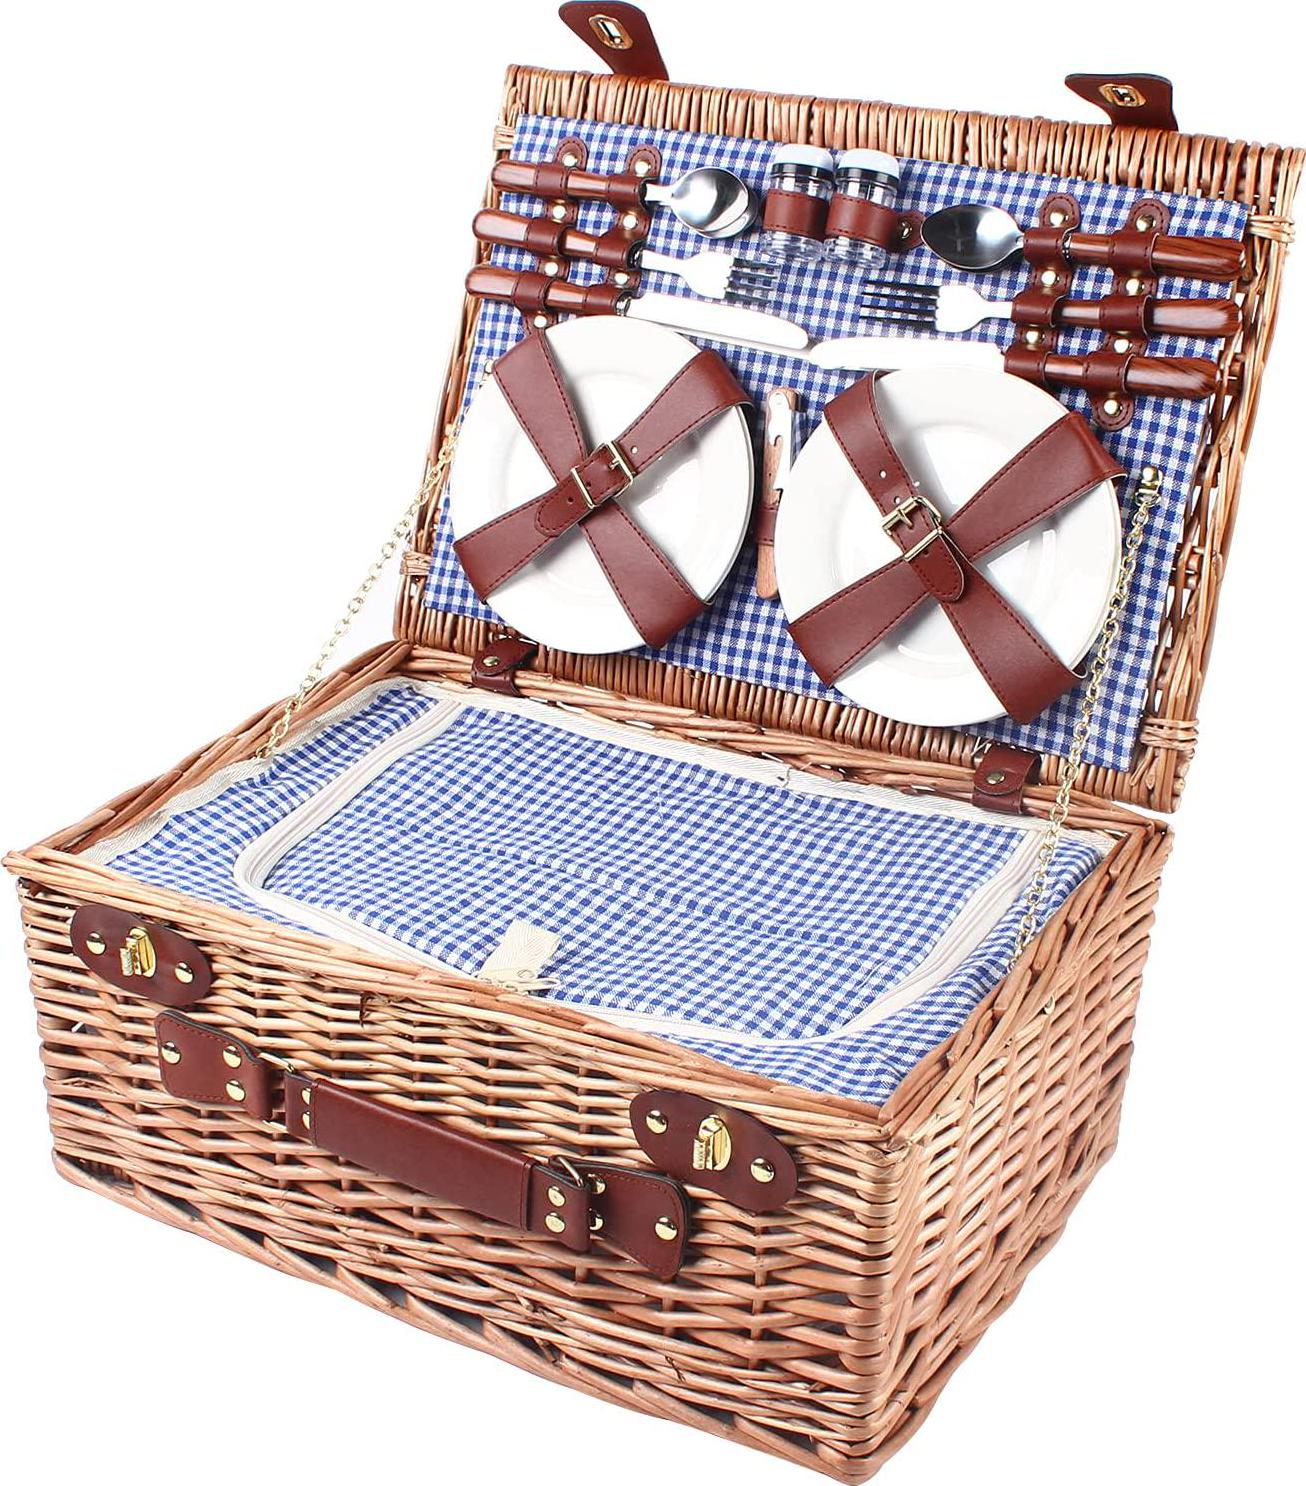 Wicker Picnic Basket Set for 4, Waterproof Large Picnic Set with Portable Handle for Family, Party, Camping-